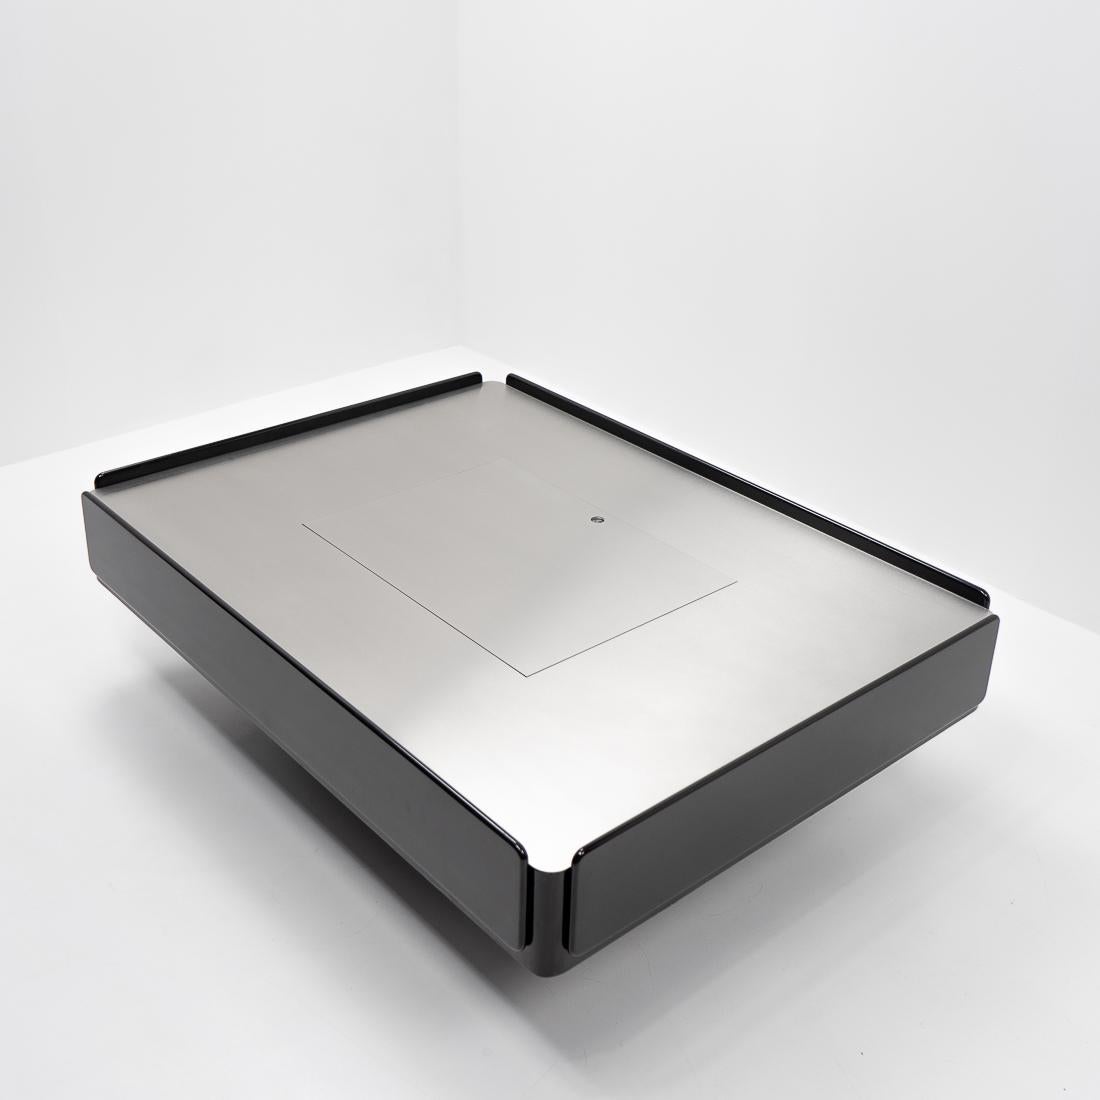 A Caori coffee table by the Italian designer Vico Magistretti for Gavina, produced during the 1960s in Italy. 

The black lacquered wooden base has on each side practical storage compartments with one central storage box containing a storage space